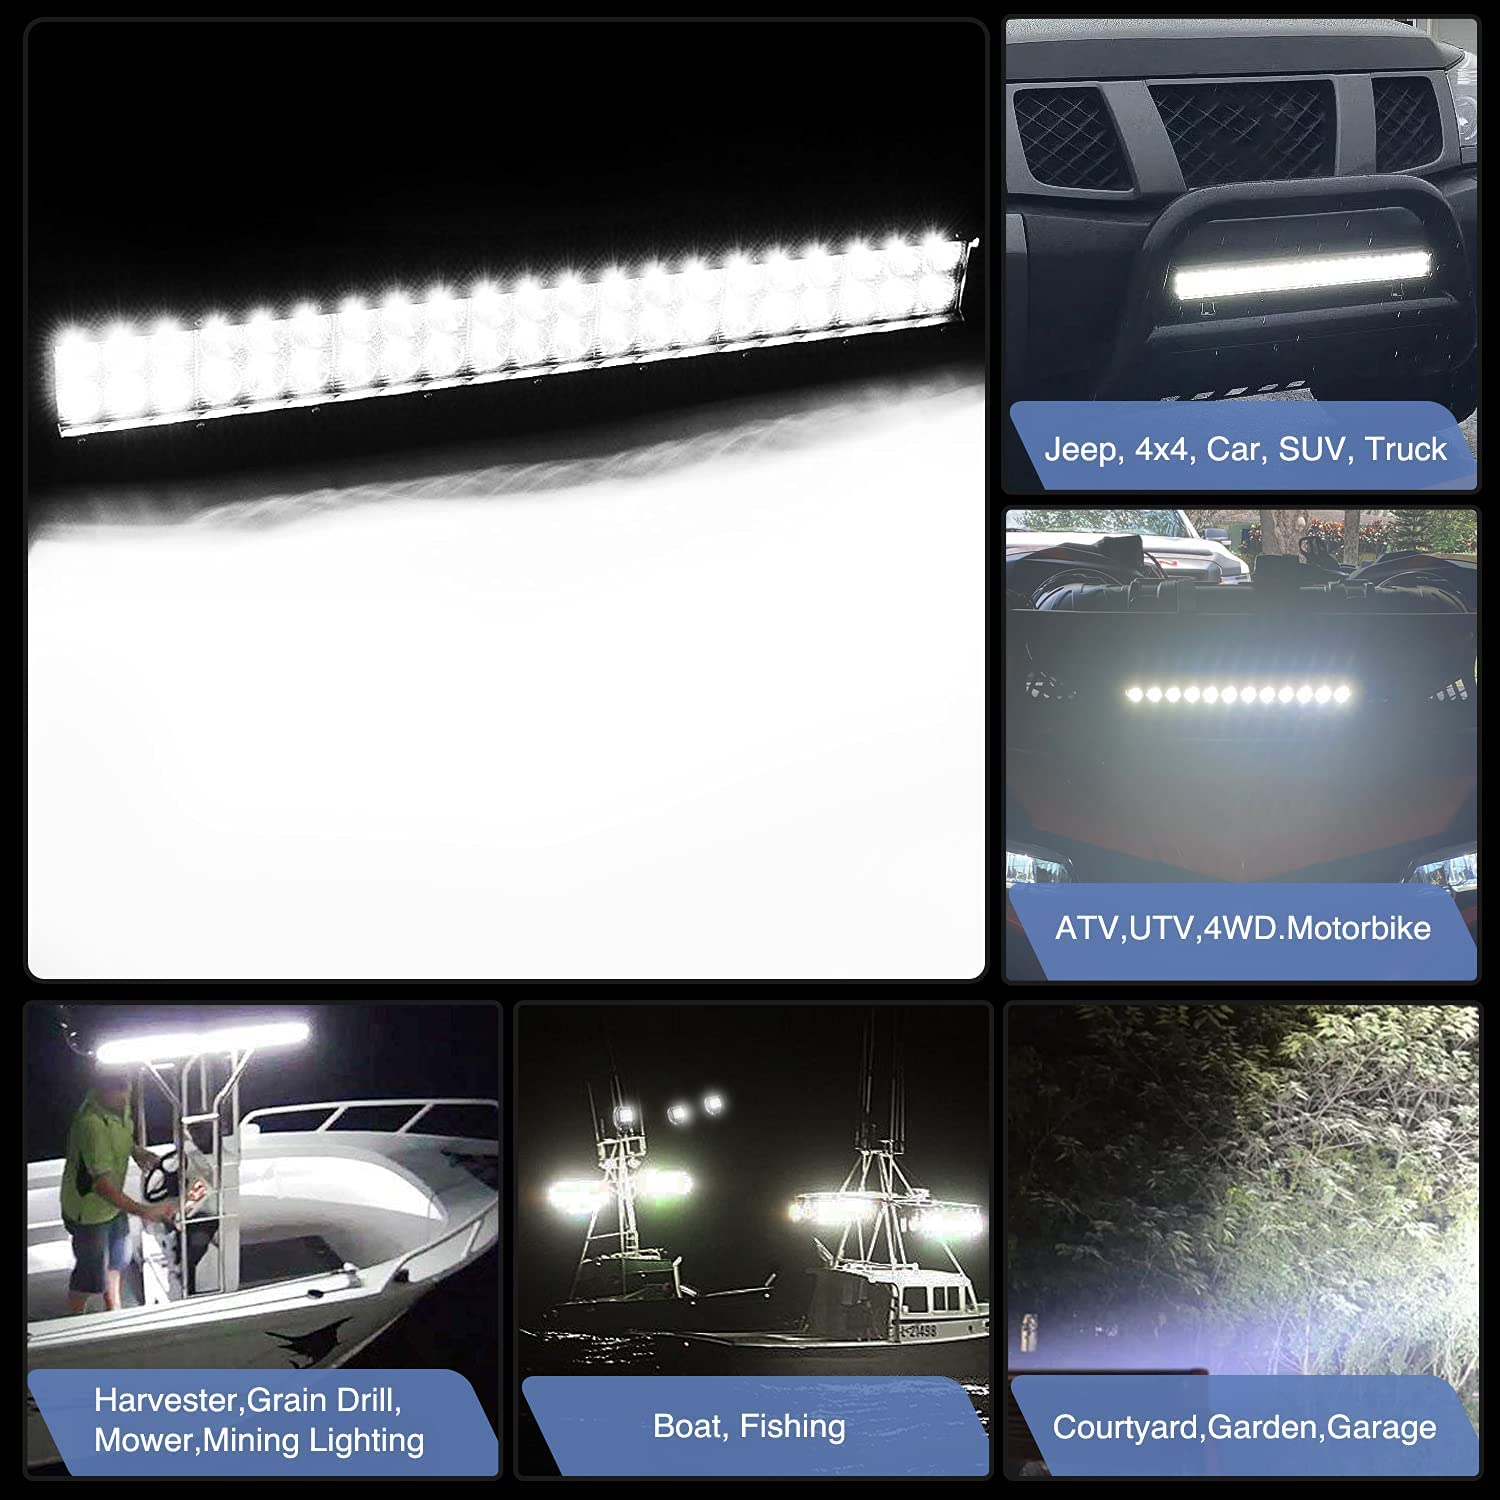 20 Inch 126W Led Light Bar Spot Flood Combo with 16AWG Wiring Harness